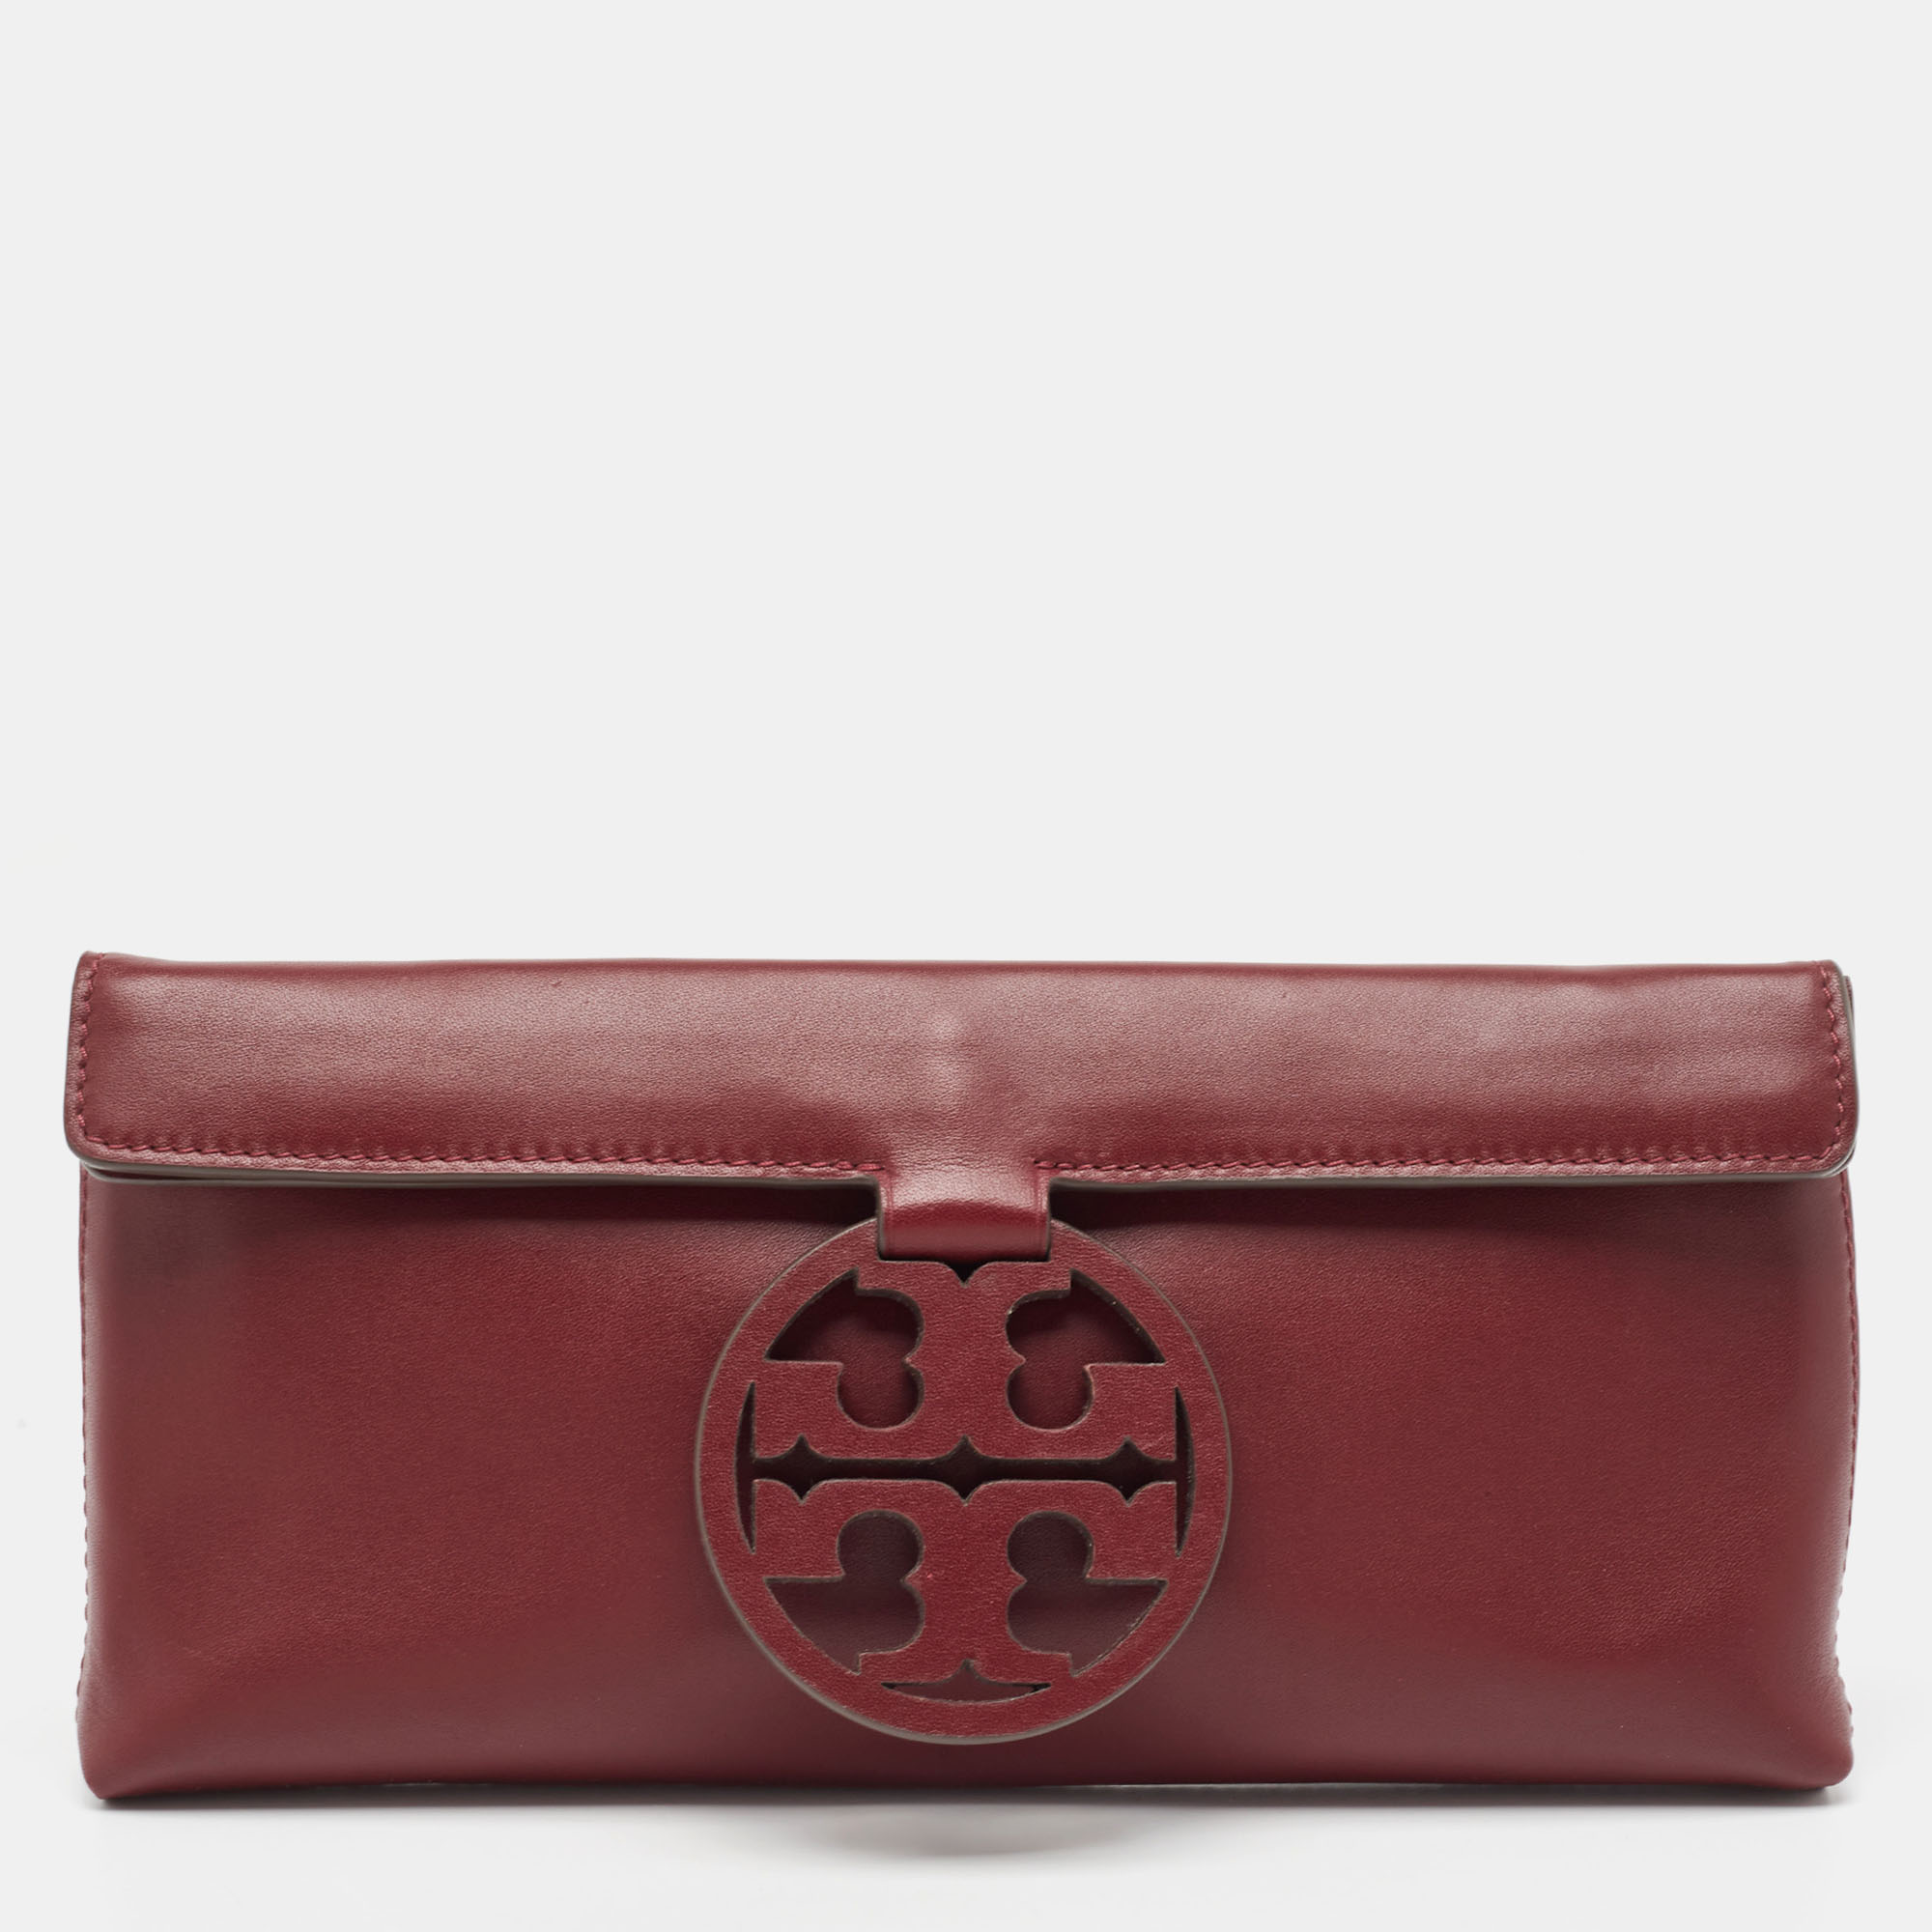 Pre-owned Tory Burch Burgundy Leather Miller Clutch